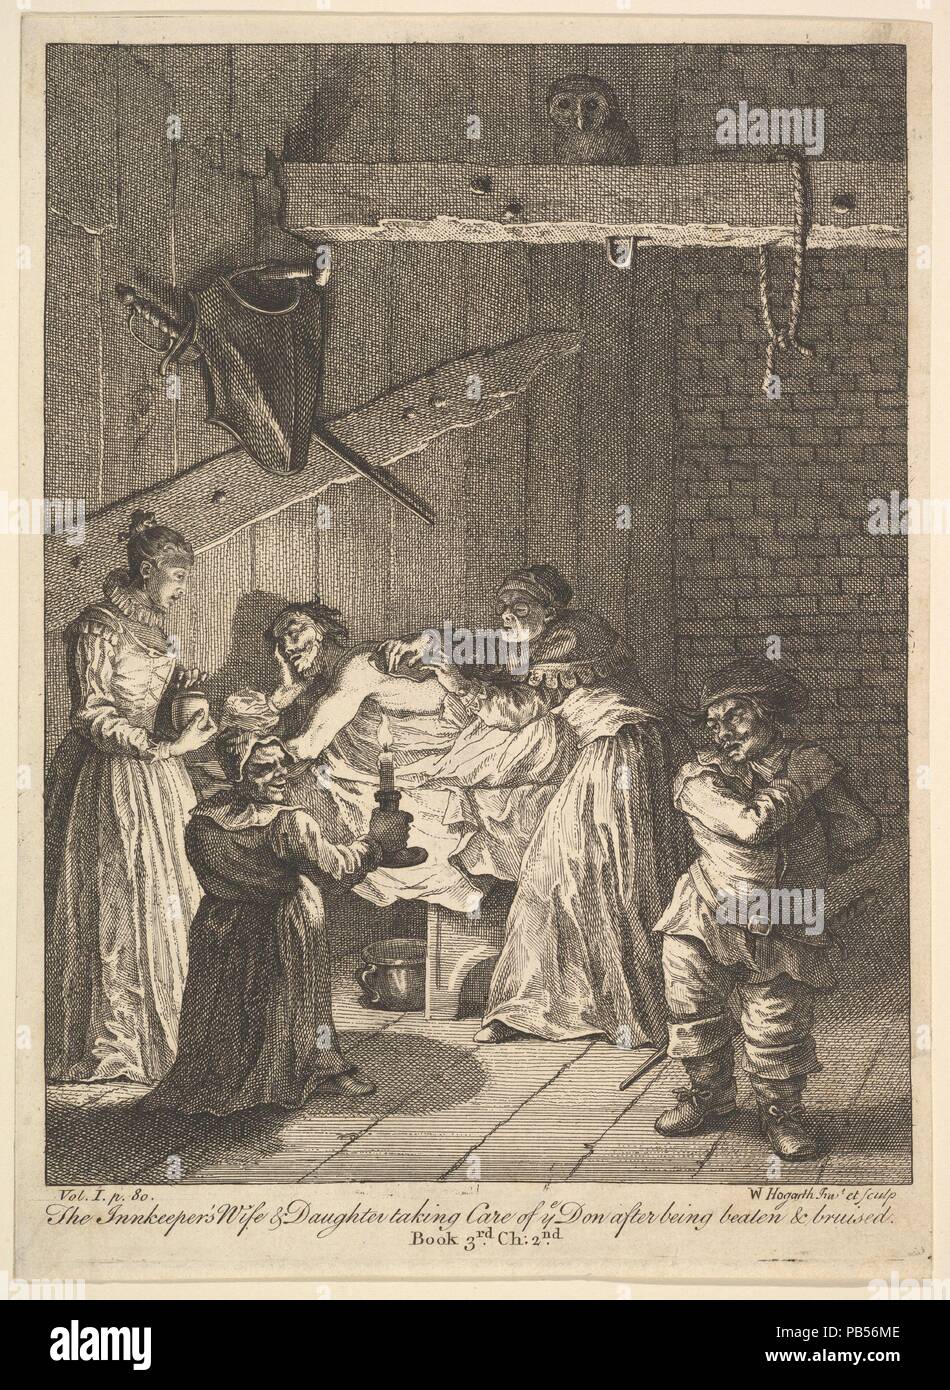 The Innkeeper's Wife and Daughter Taking Care of ye Don after Being Beaten and Bruised (Six Illustrations for Don Quixote). Artist: William Hogarth (British, London 1697-1764 London). Author: Illustration of Miguel de Cervantes Saavedra (Spanish, Alcalá 1547-1616 Madrid). Dimensions: Sheet: 9 15/16 x 7 3/16 in. (25.2 x 18.3 cm). Date: 1756 or after. Museum: Metropolitan Museum of Art, New York, USA. Stock Photo